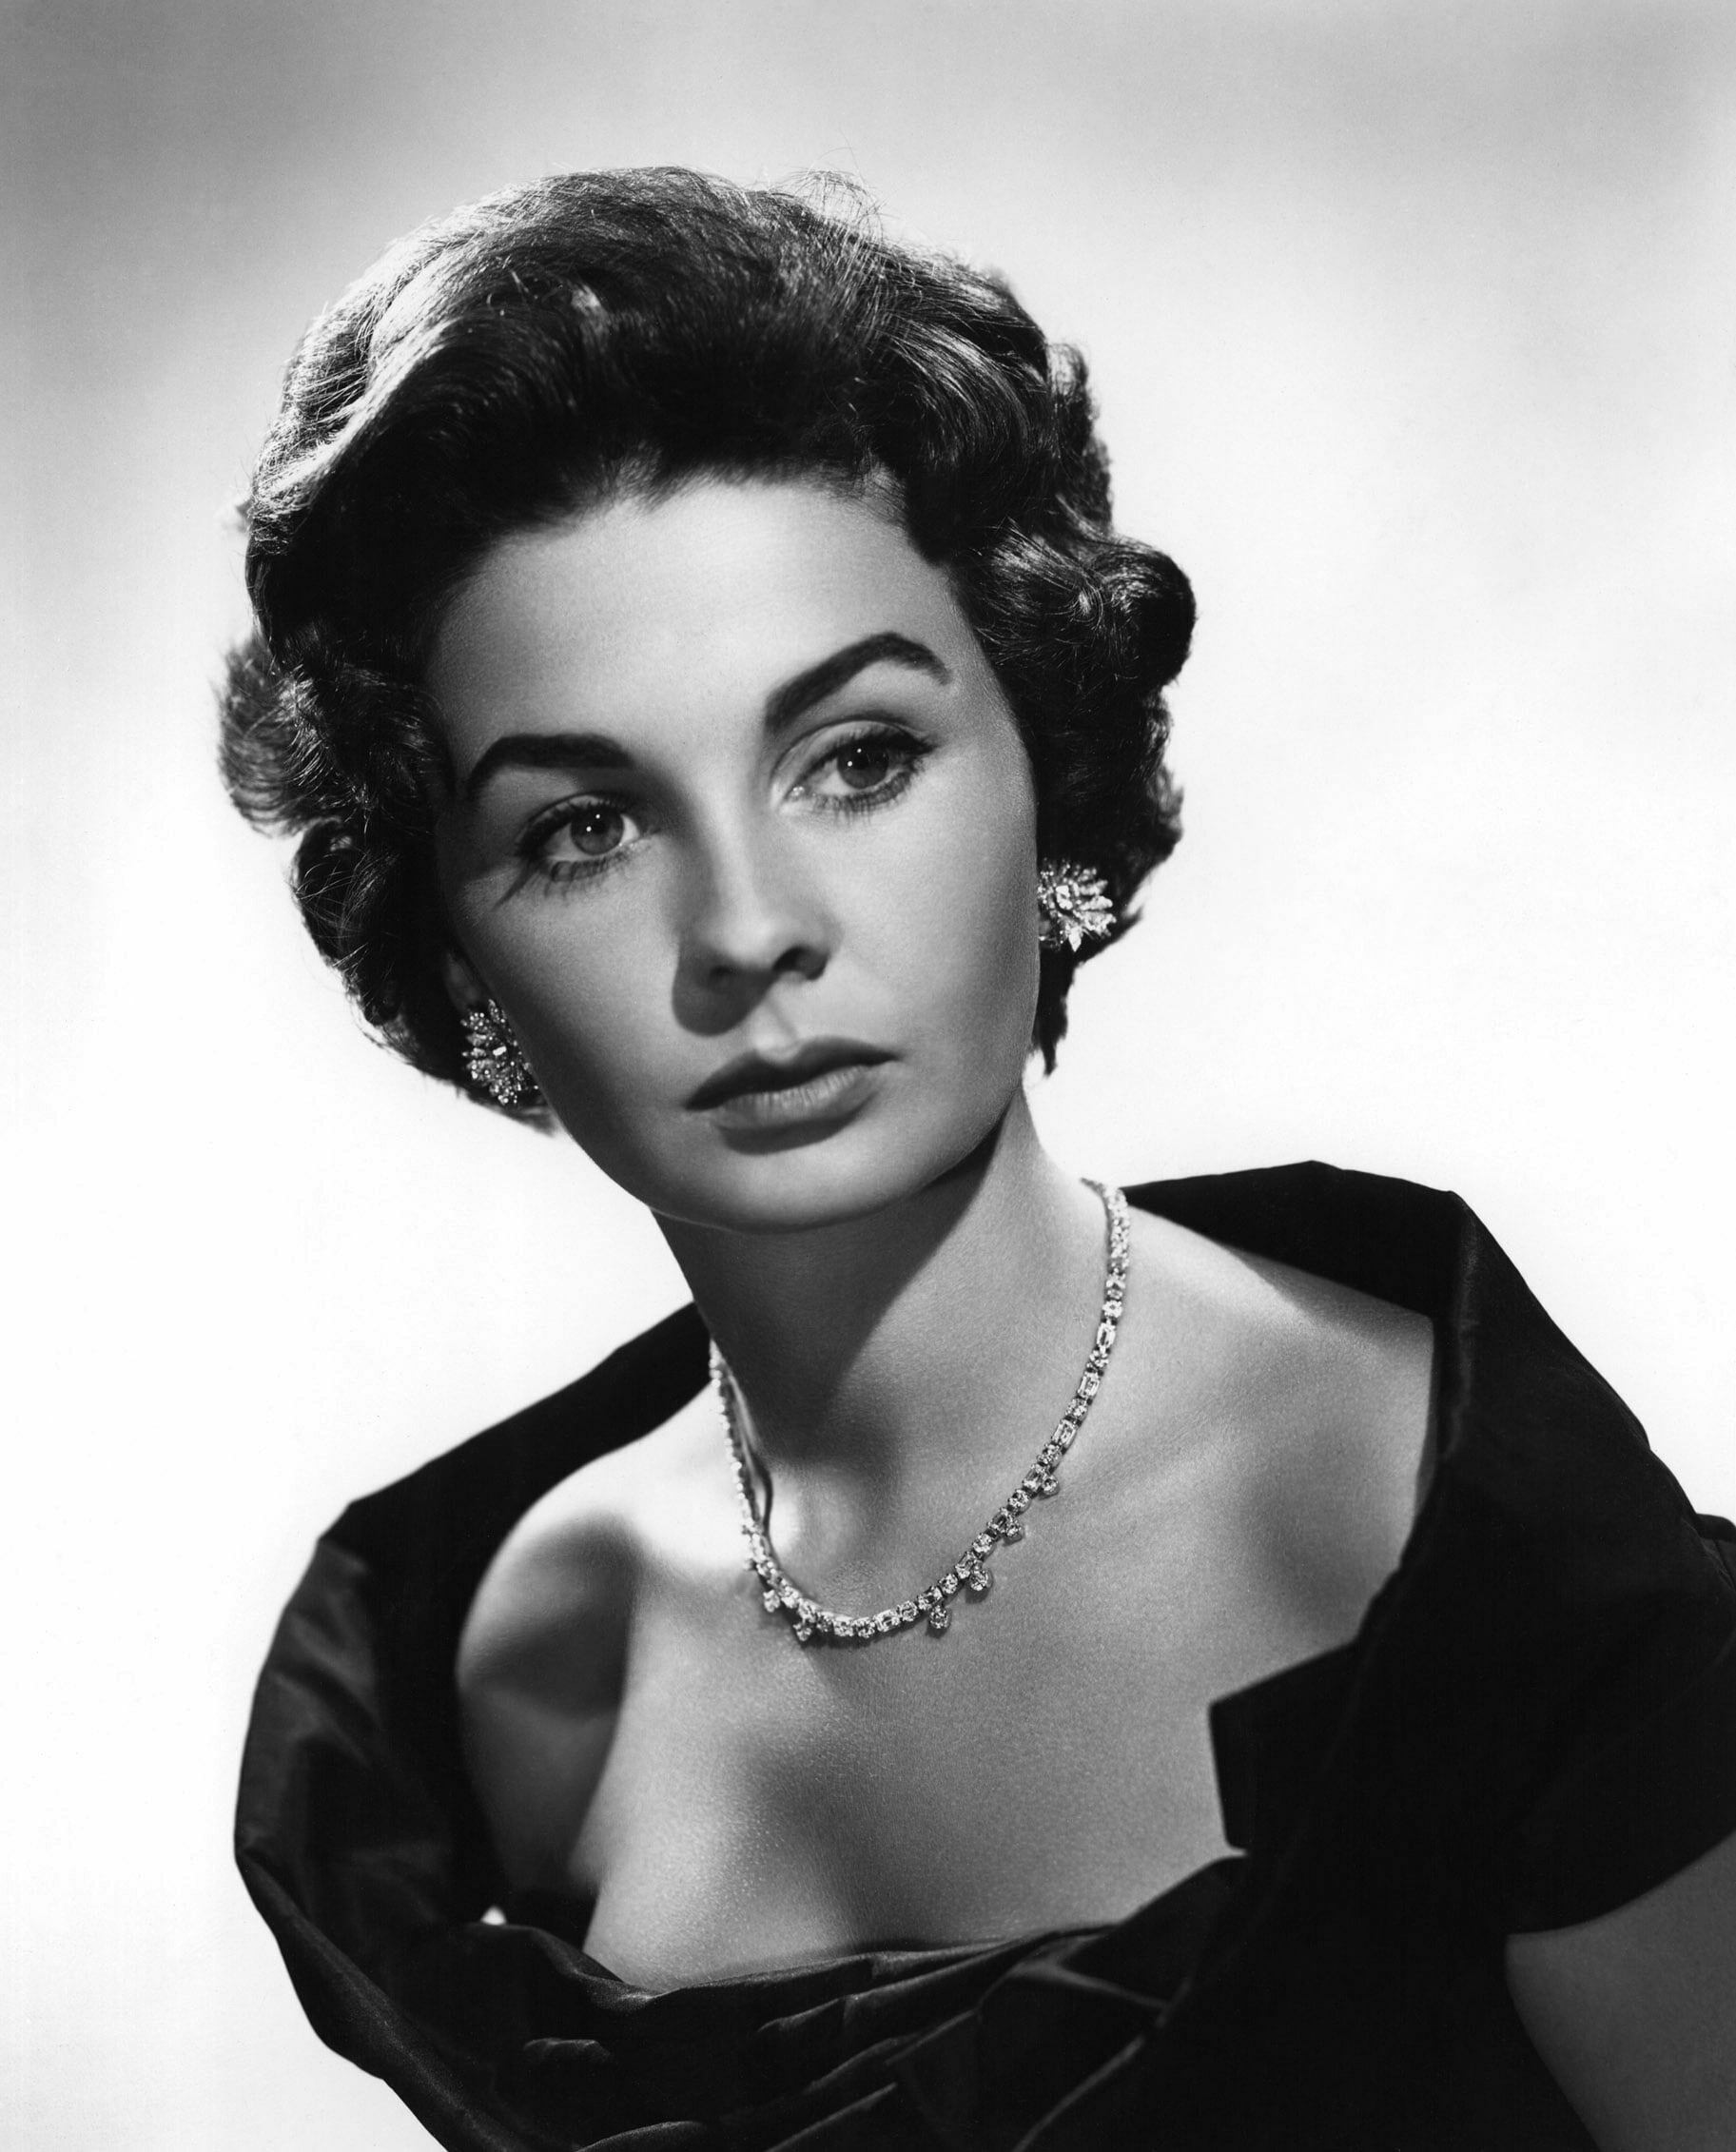 A Brief Profile of Jean Simmons